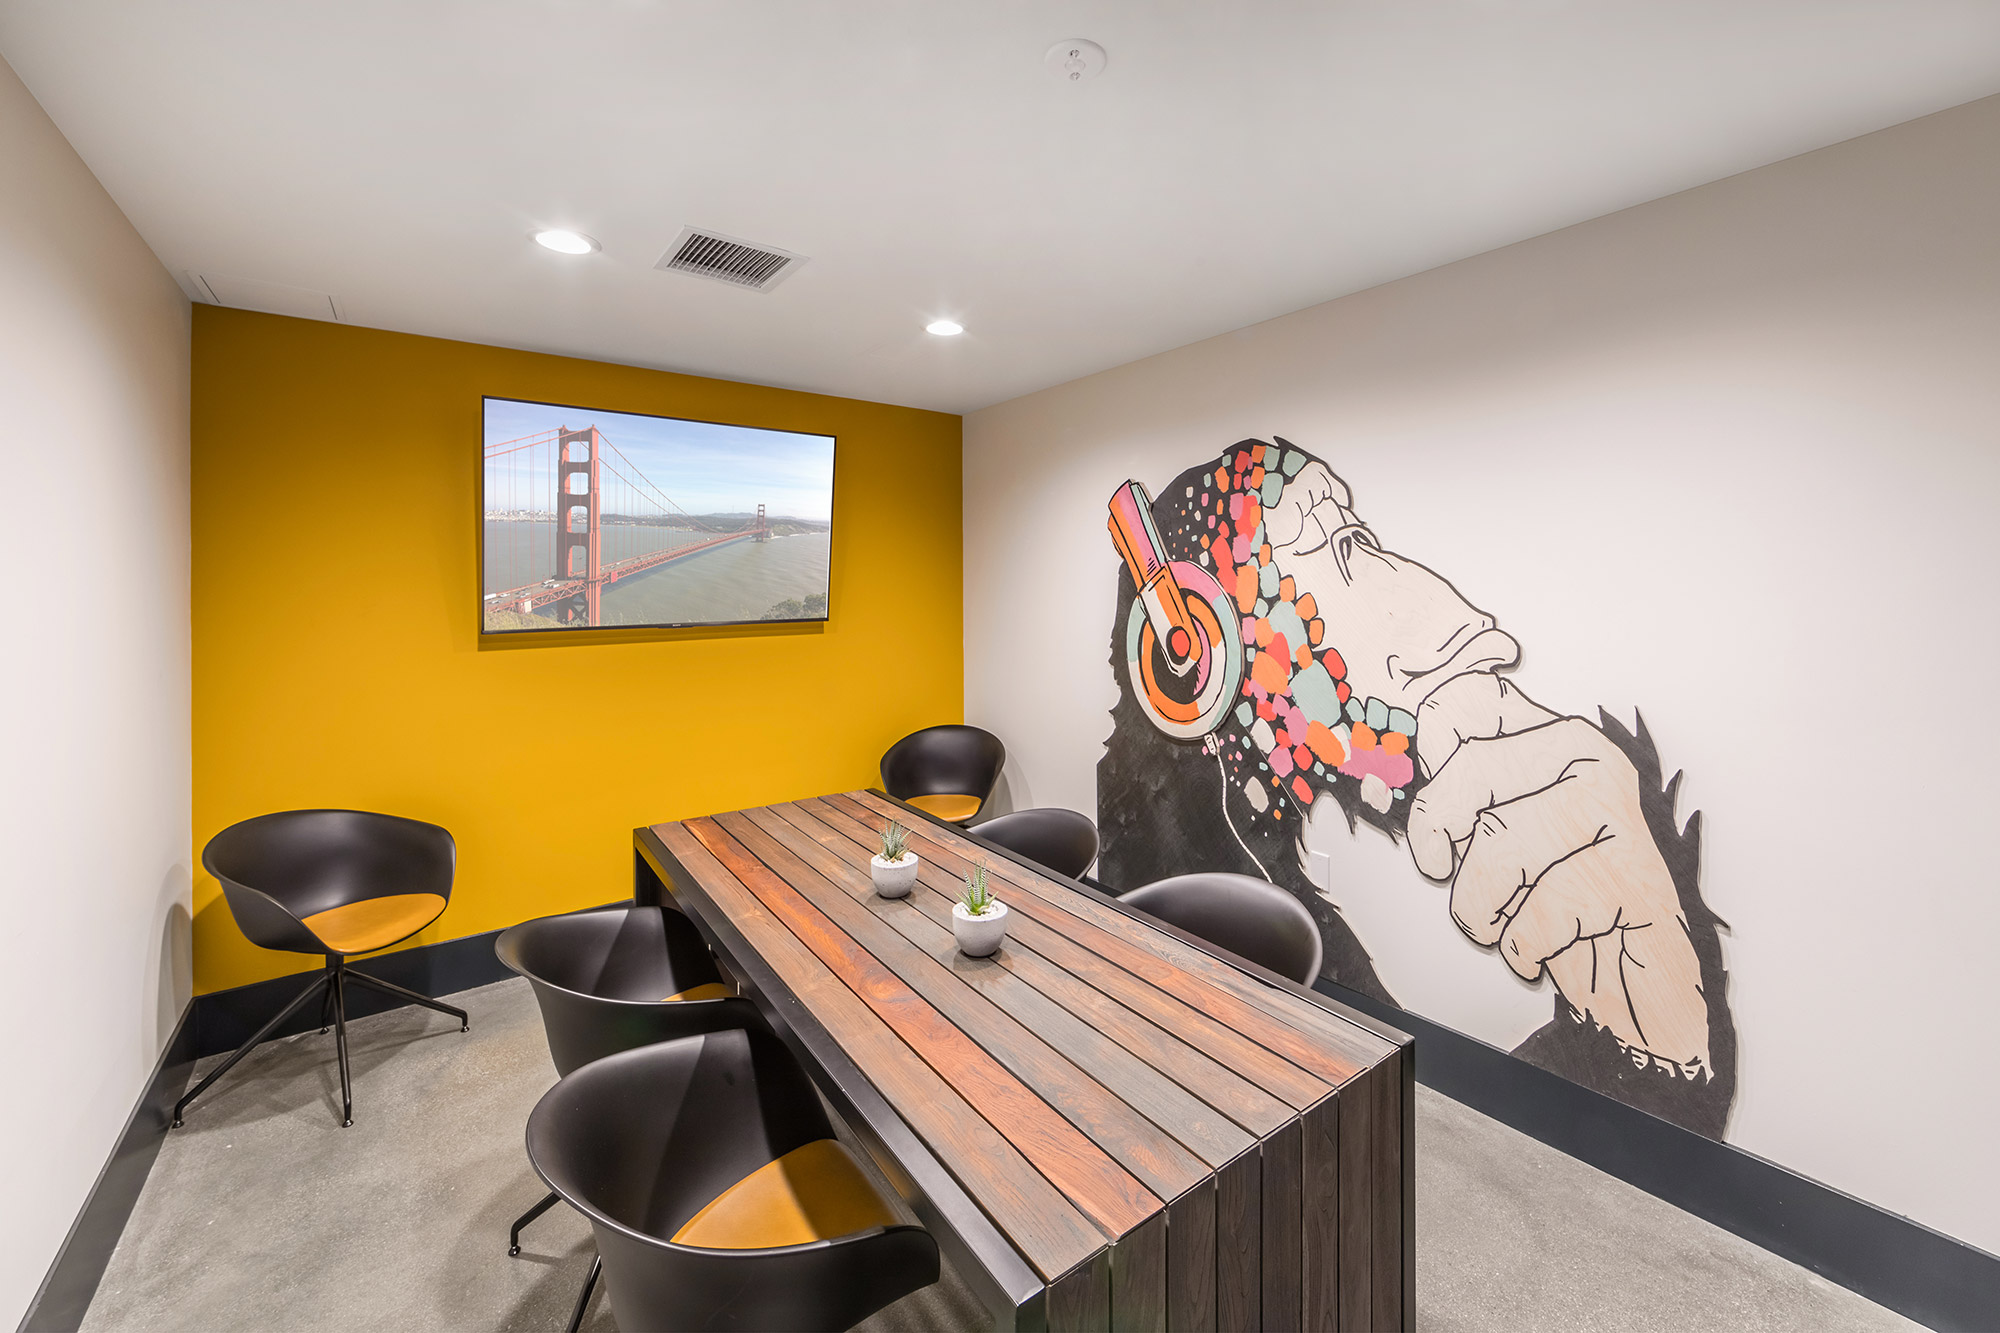 Private office with modern conference table, accent wall, bucket seats and a wall-mounted TV.